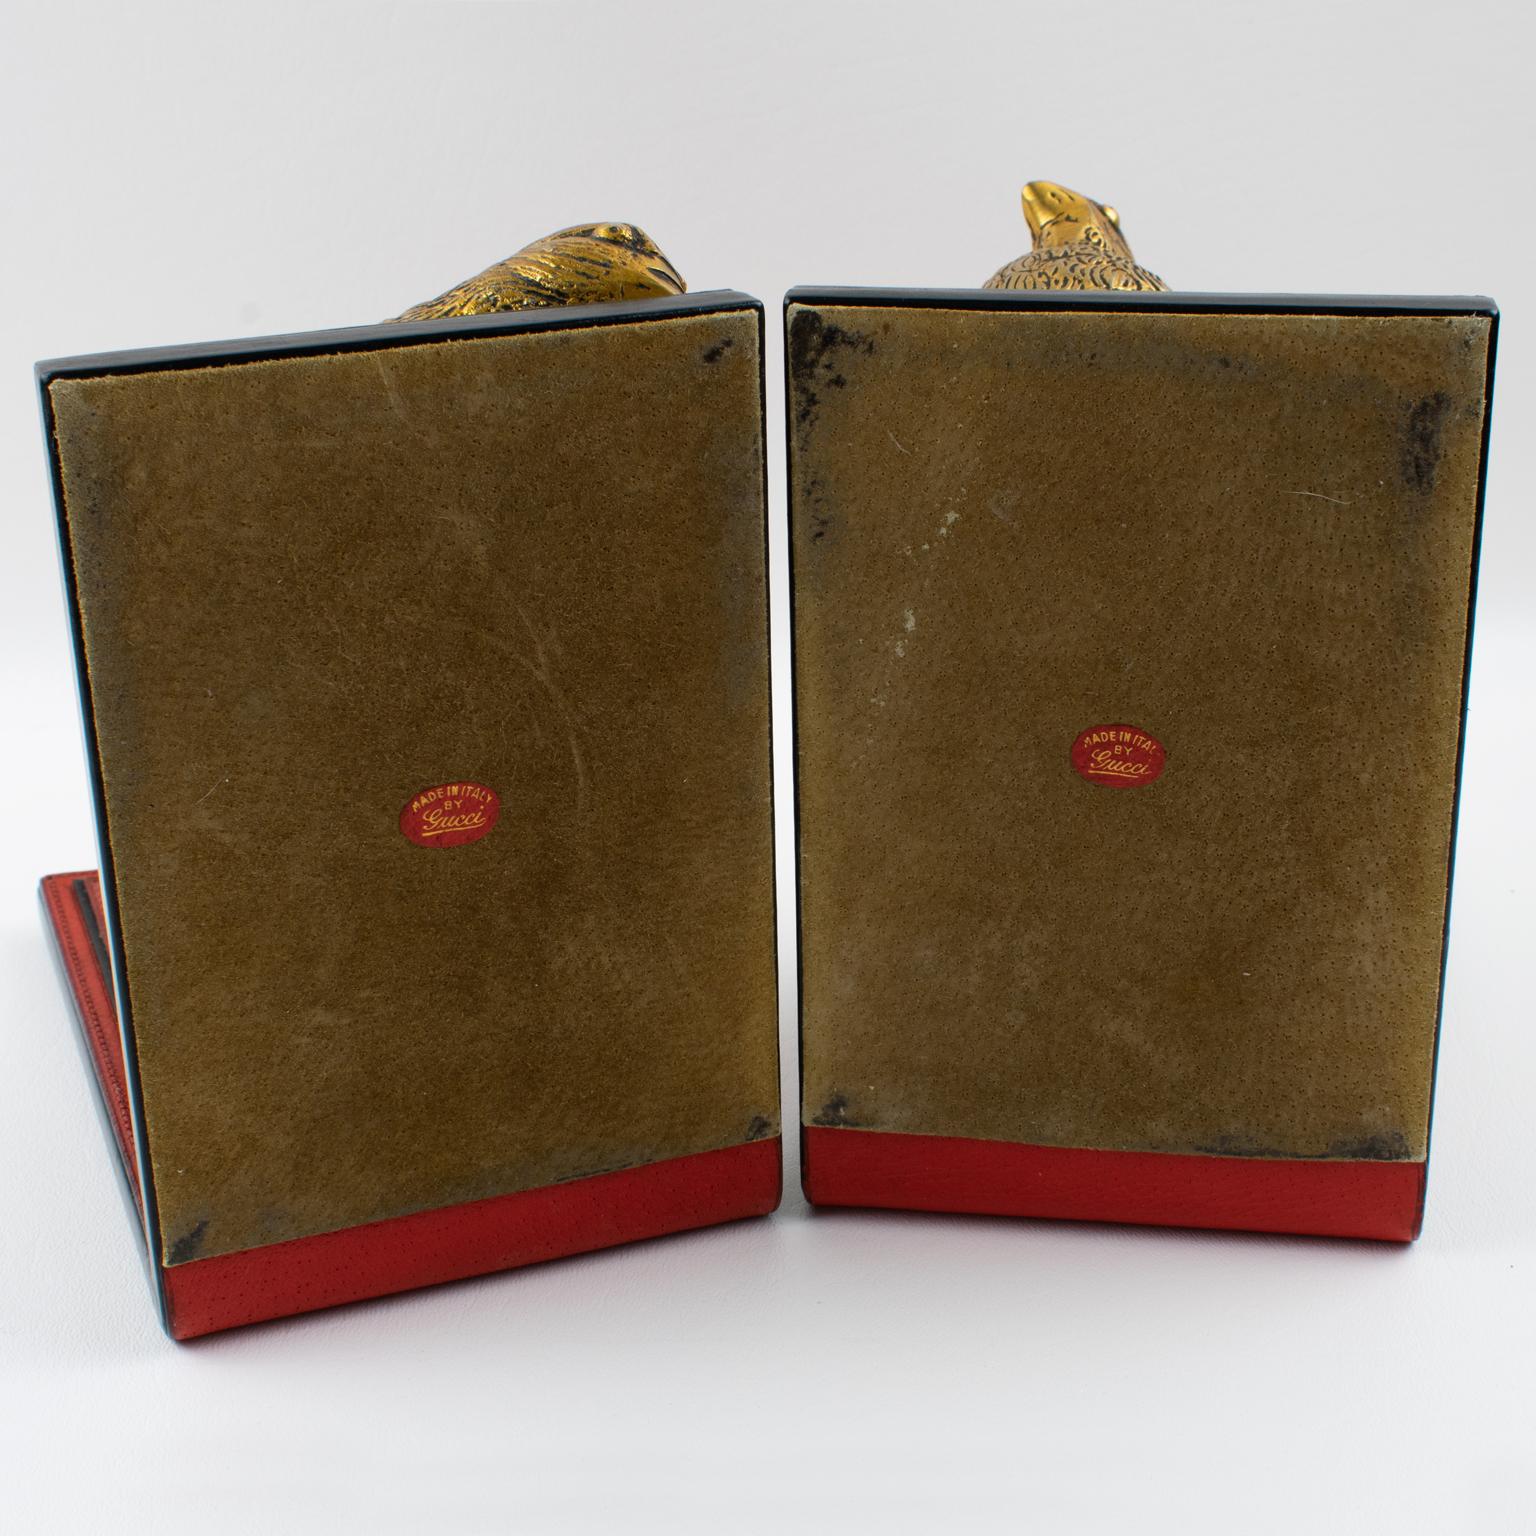 Gucci Italy Hand-Stitched Red Leather Bookends with Gilt Metal Partridges, 1970s For Sale 5